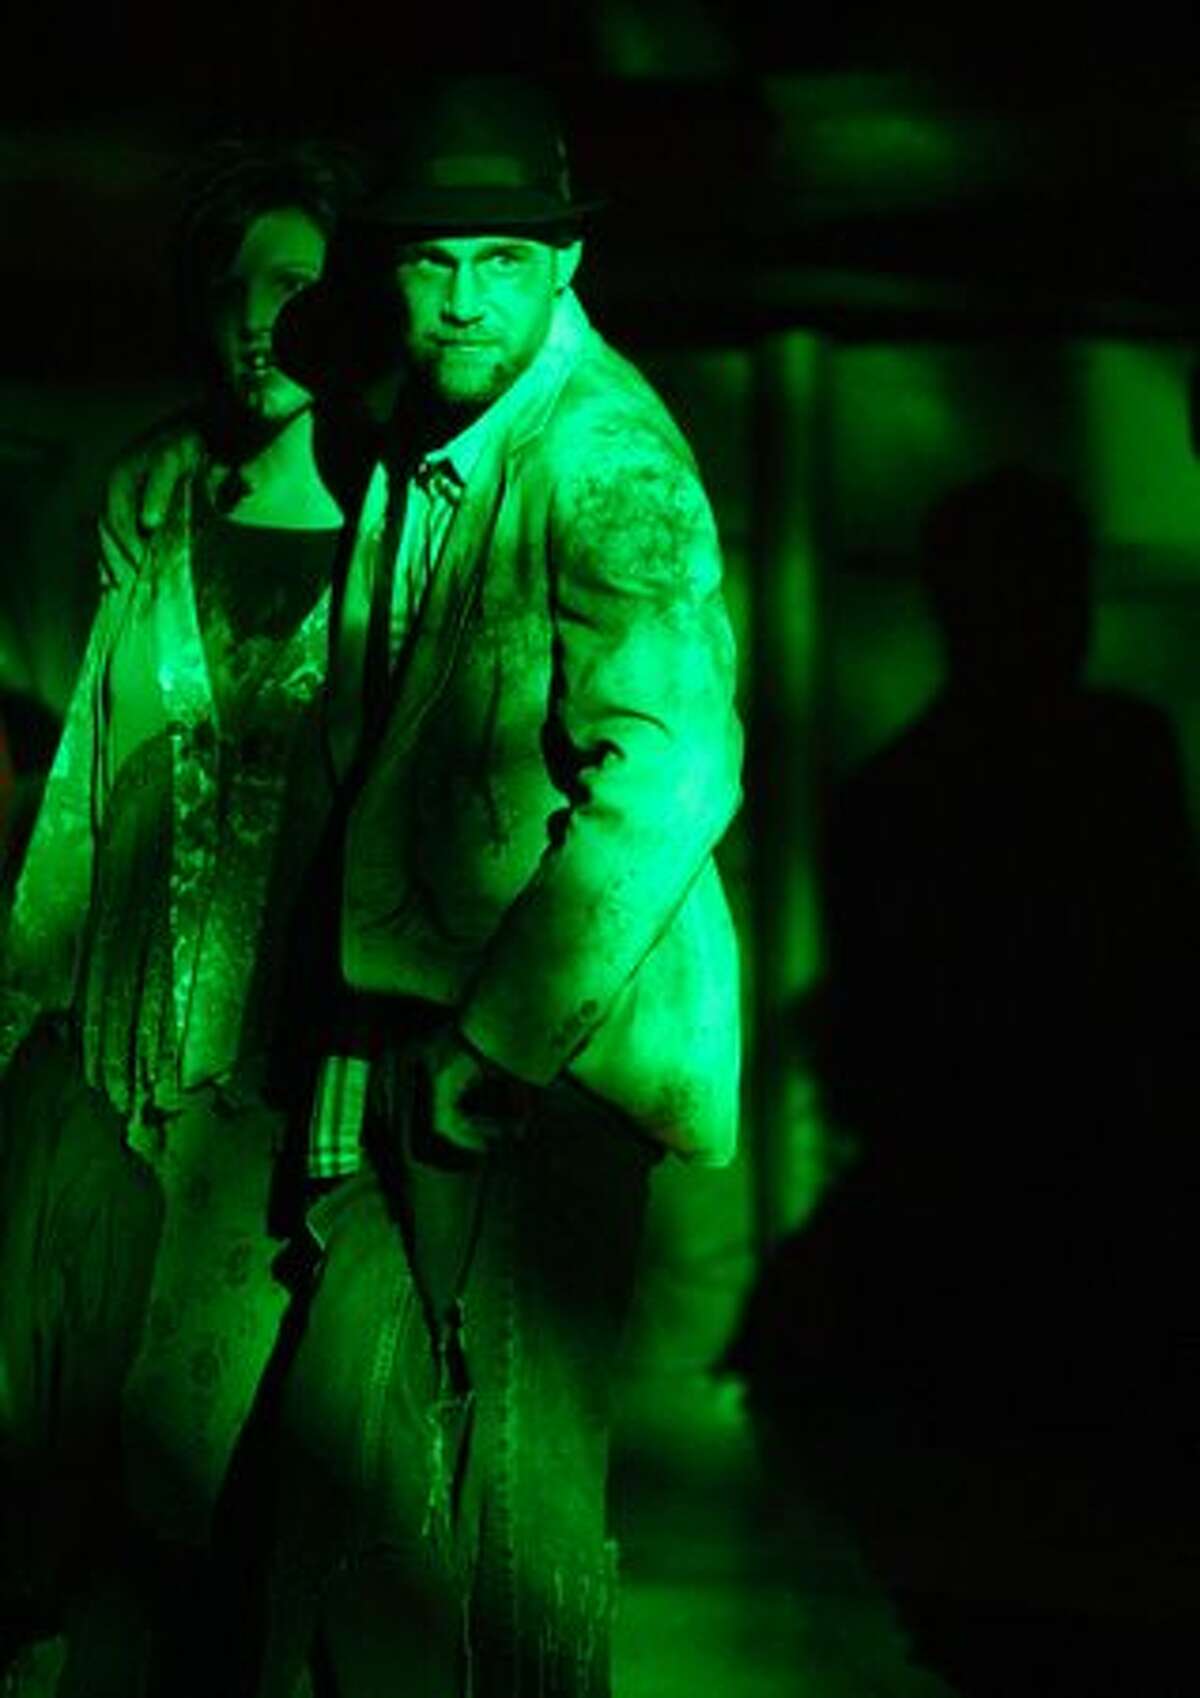 Zombie guests stand under a green spotlight during a wedding and wedding vow renewal ceremony.